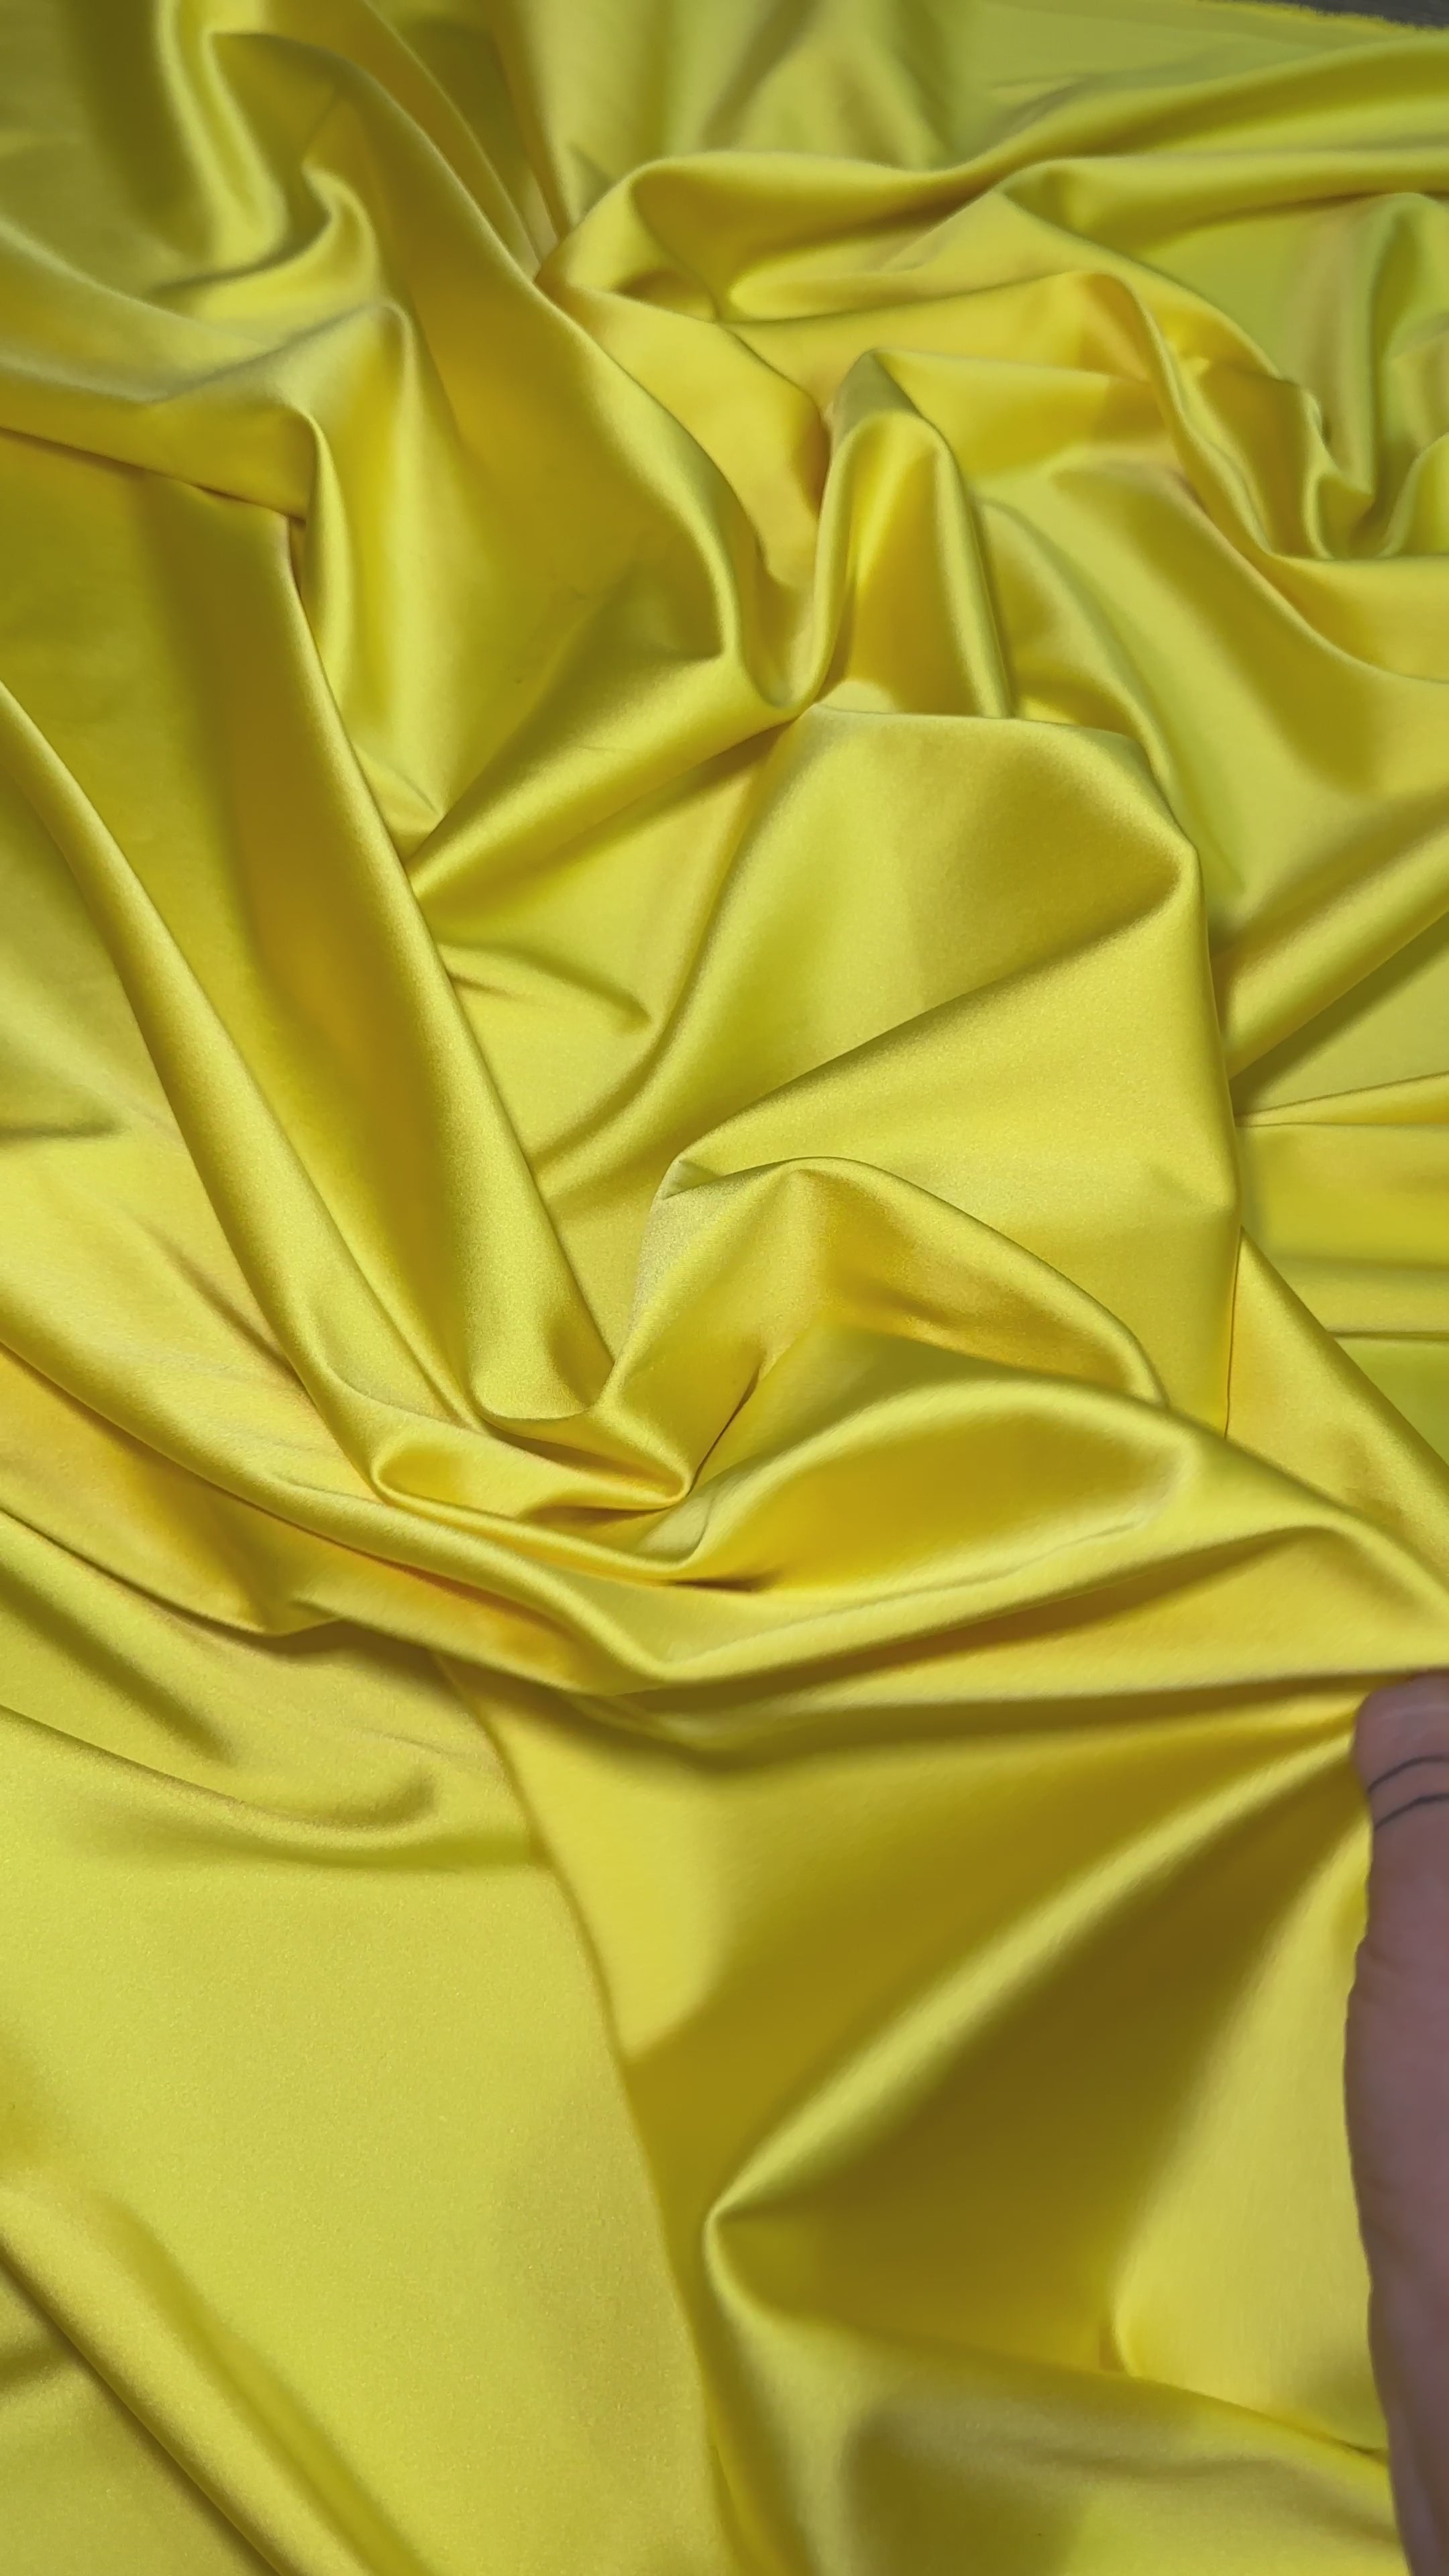  yellow stretch crepe back satin, light yellow stretch crepe back satin, dark yellow stretch crepe back satin, premium stretch crepe back satin, satin for bride, satin for woman, satin in low price, cheap satin, satin on sale